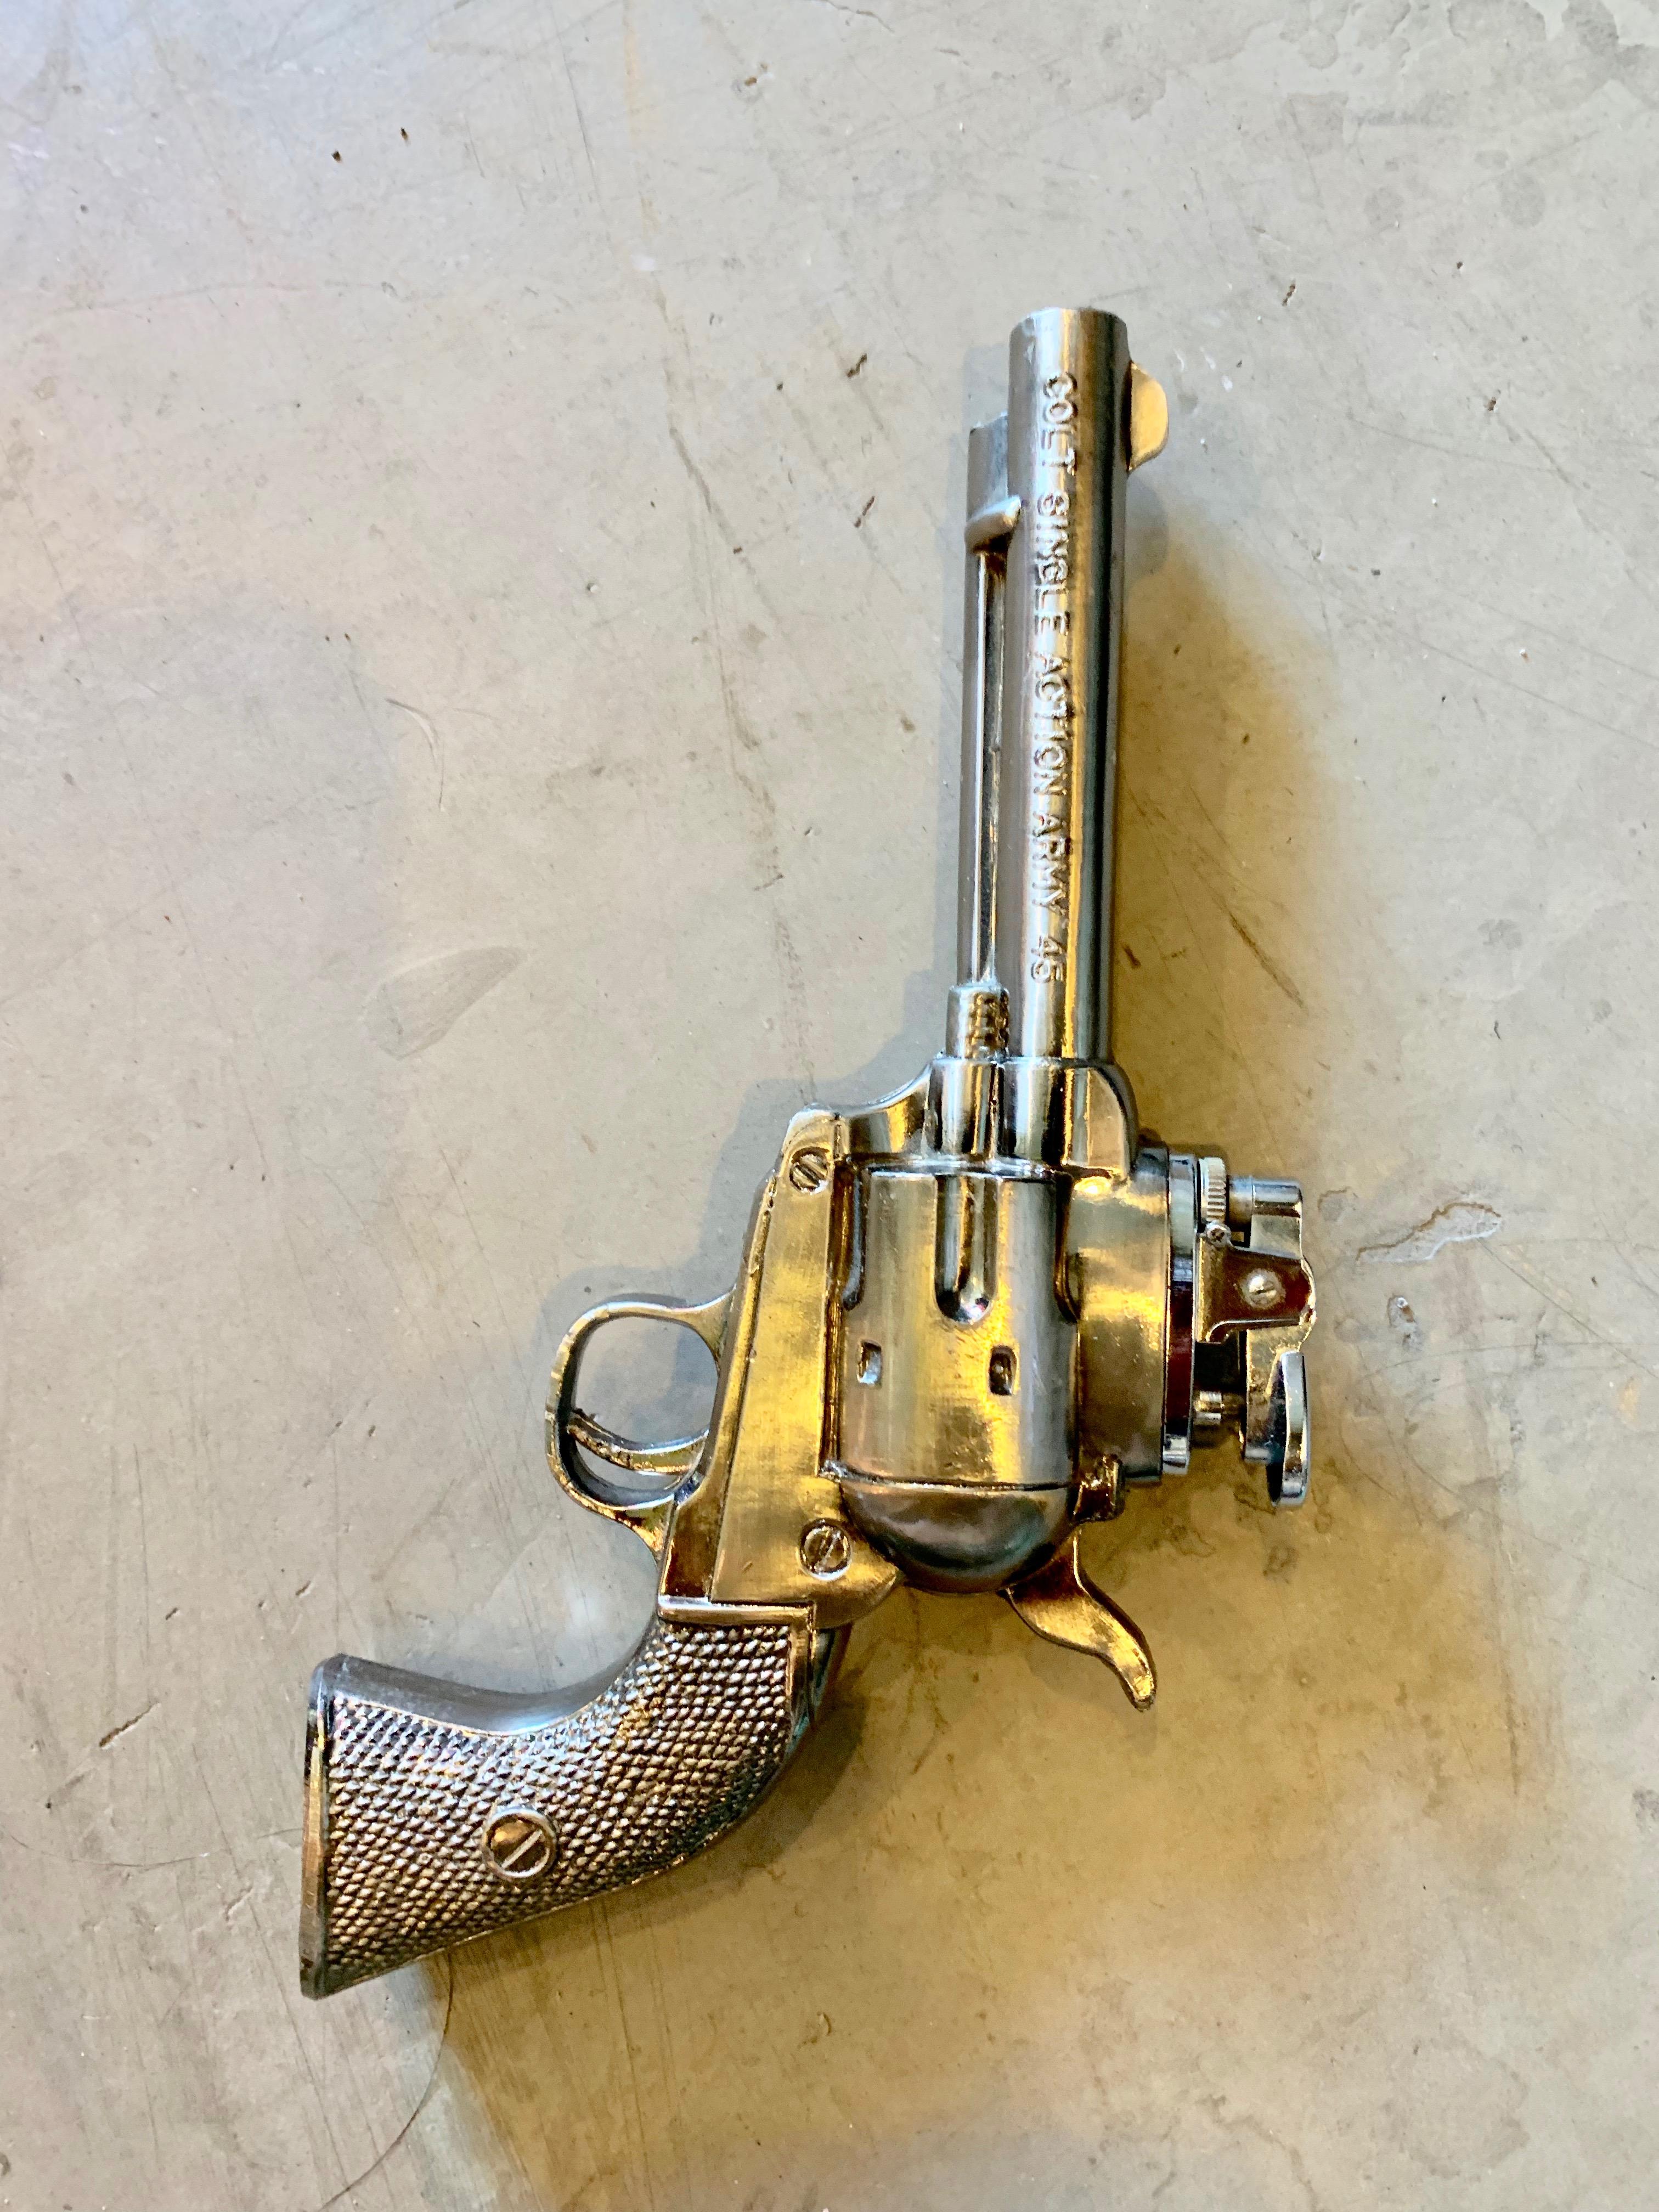 Cool vintage table lighter in the shape of a colt, single action revolver handgun. Made of metal. Made in Japan. Good working condition. Great object.

 